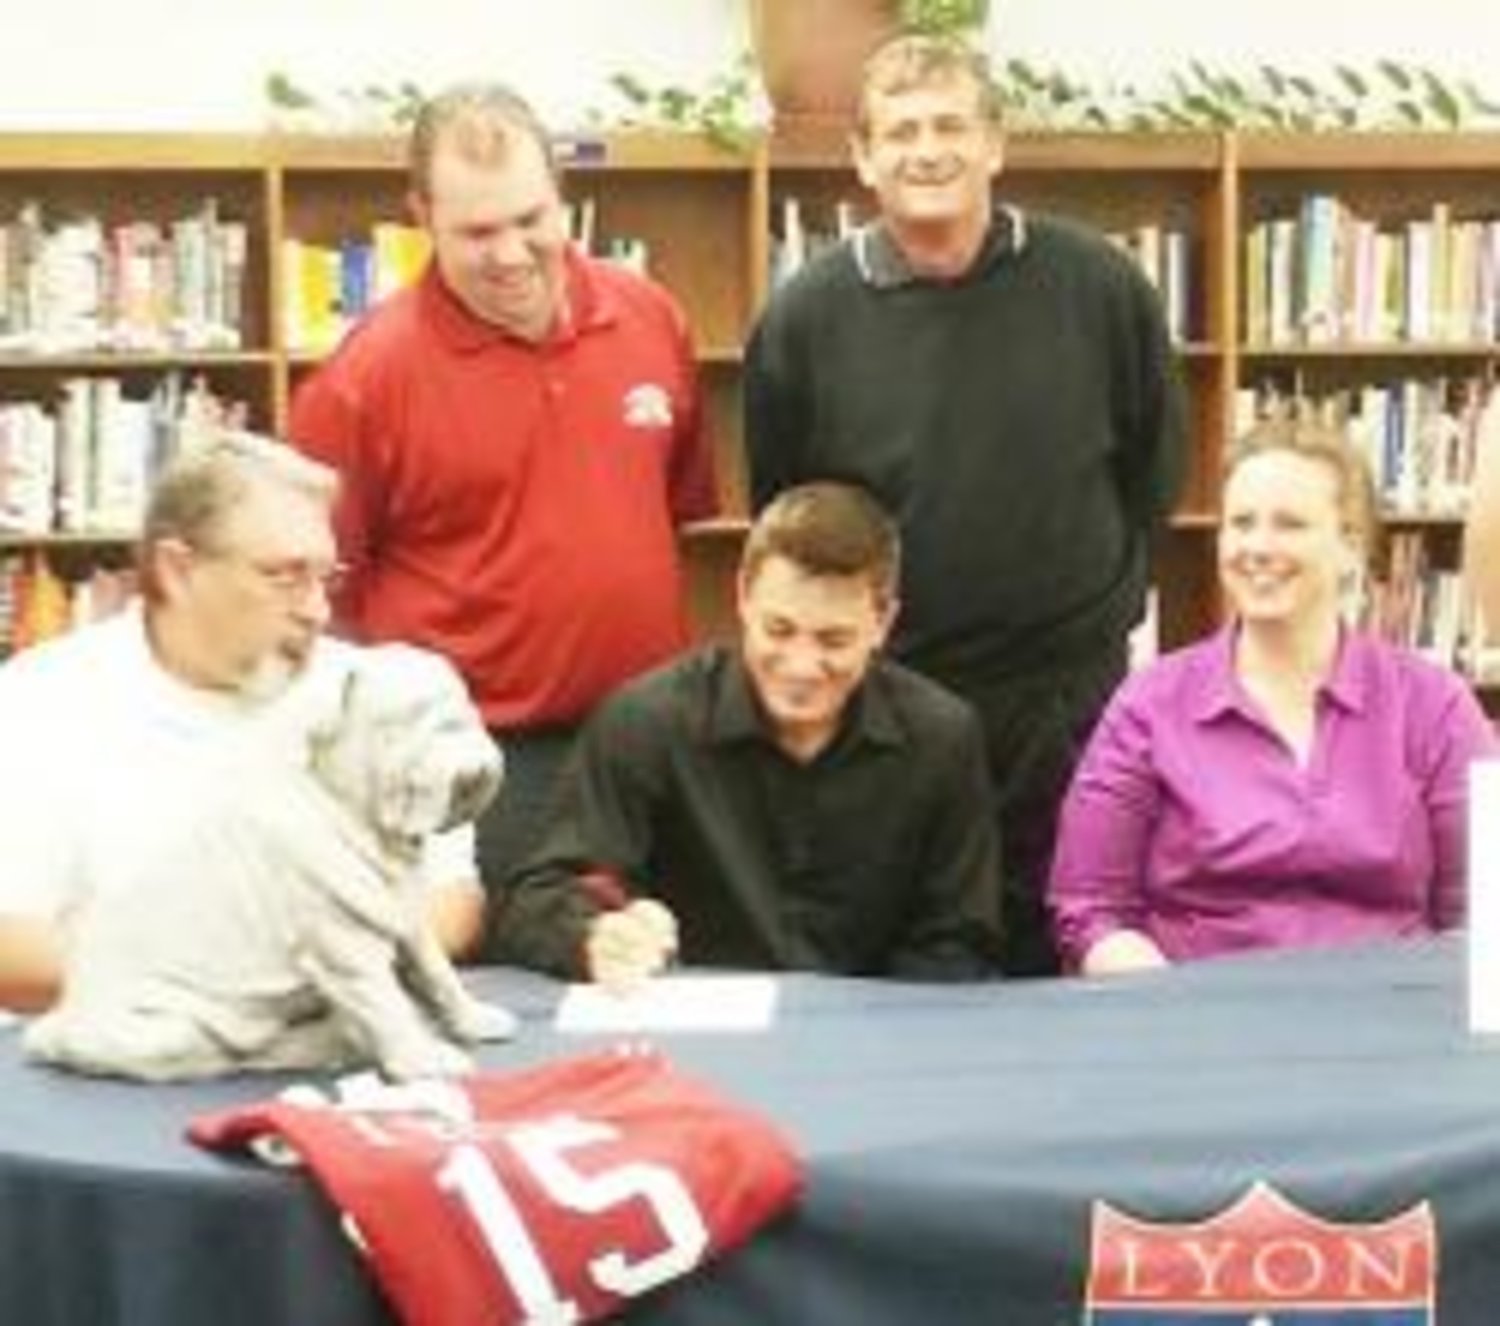 Eli Click, a senior at Quitman High School, signed a football scholarship with Lyon College. The college is located in Batesville, Arkansas. Coach Phelps, previous athletic director and head football coach Ron Callahan, and parents David Click and Michele Freeman were present for the signing. Click was also chosen for the Chick-Fil-A Heart of a Champion All Star Bowl Game, to be played at Rose Stadium in Tyler June 14.